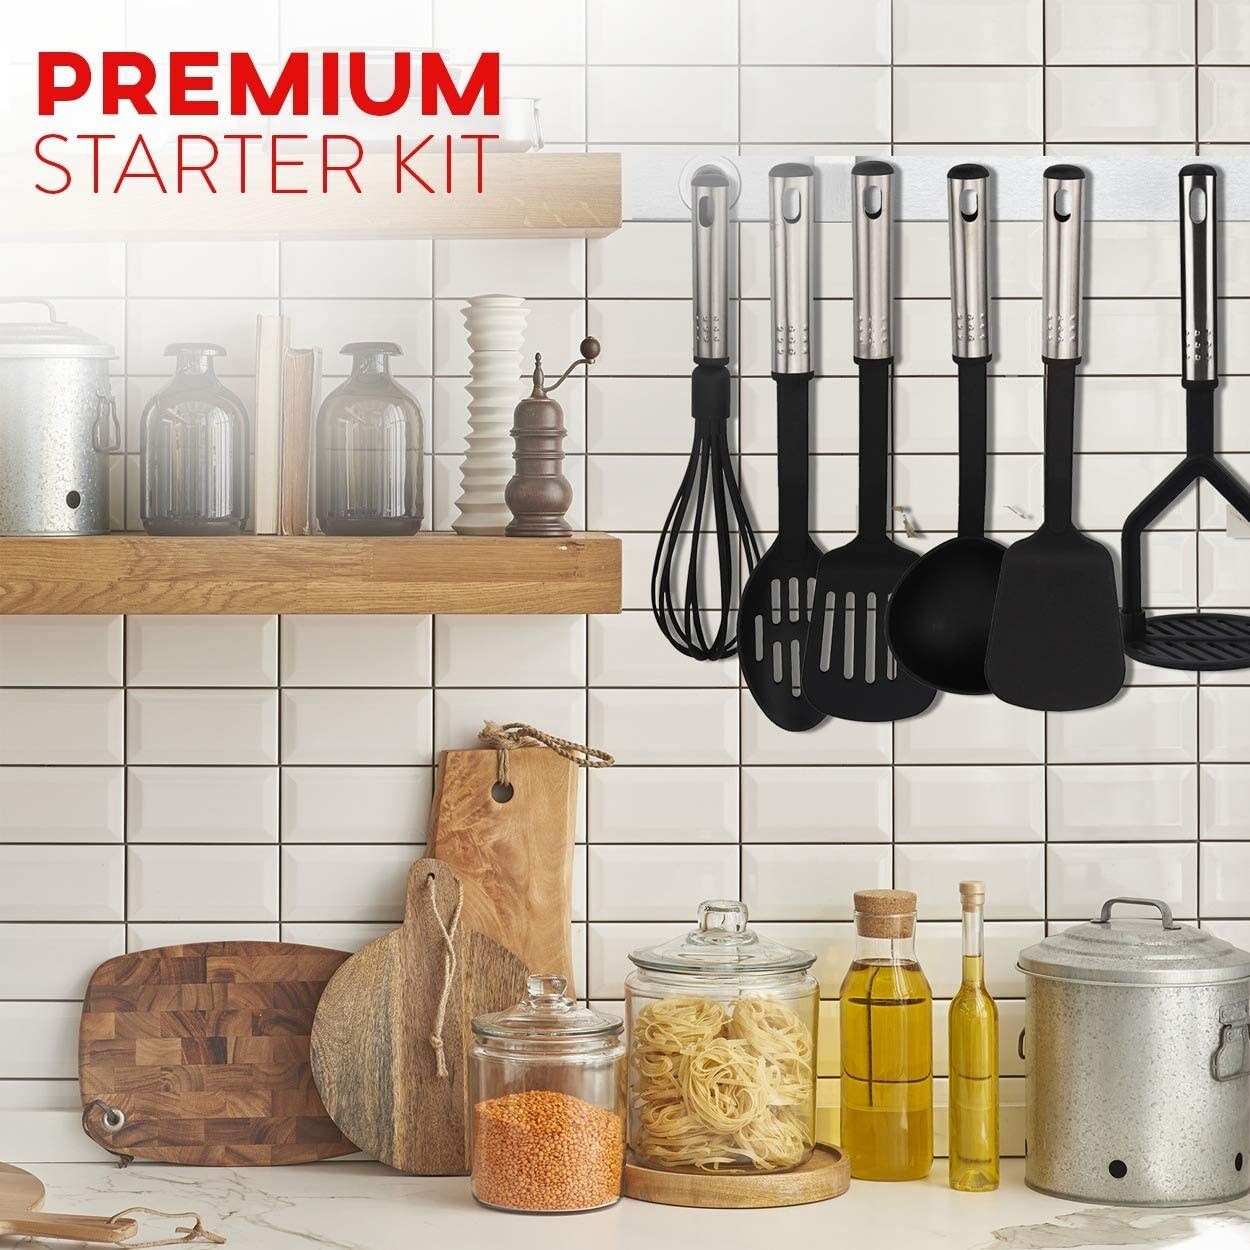 https://ak1.ostkcdn.com/images/products/is/images/direct/de17540819f2f5e4394df75ef39ecbdd6e0af752/Cooking-Utensil-Set-%2C-10-piece-Nylon-and-Stainless-Steel-Kitchen-Tools.jpg